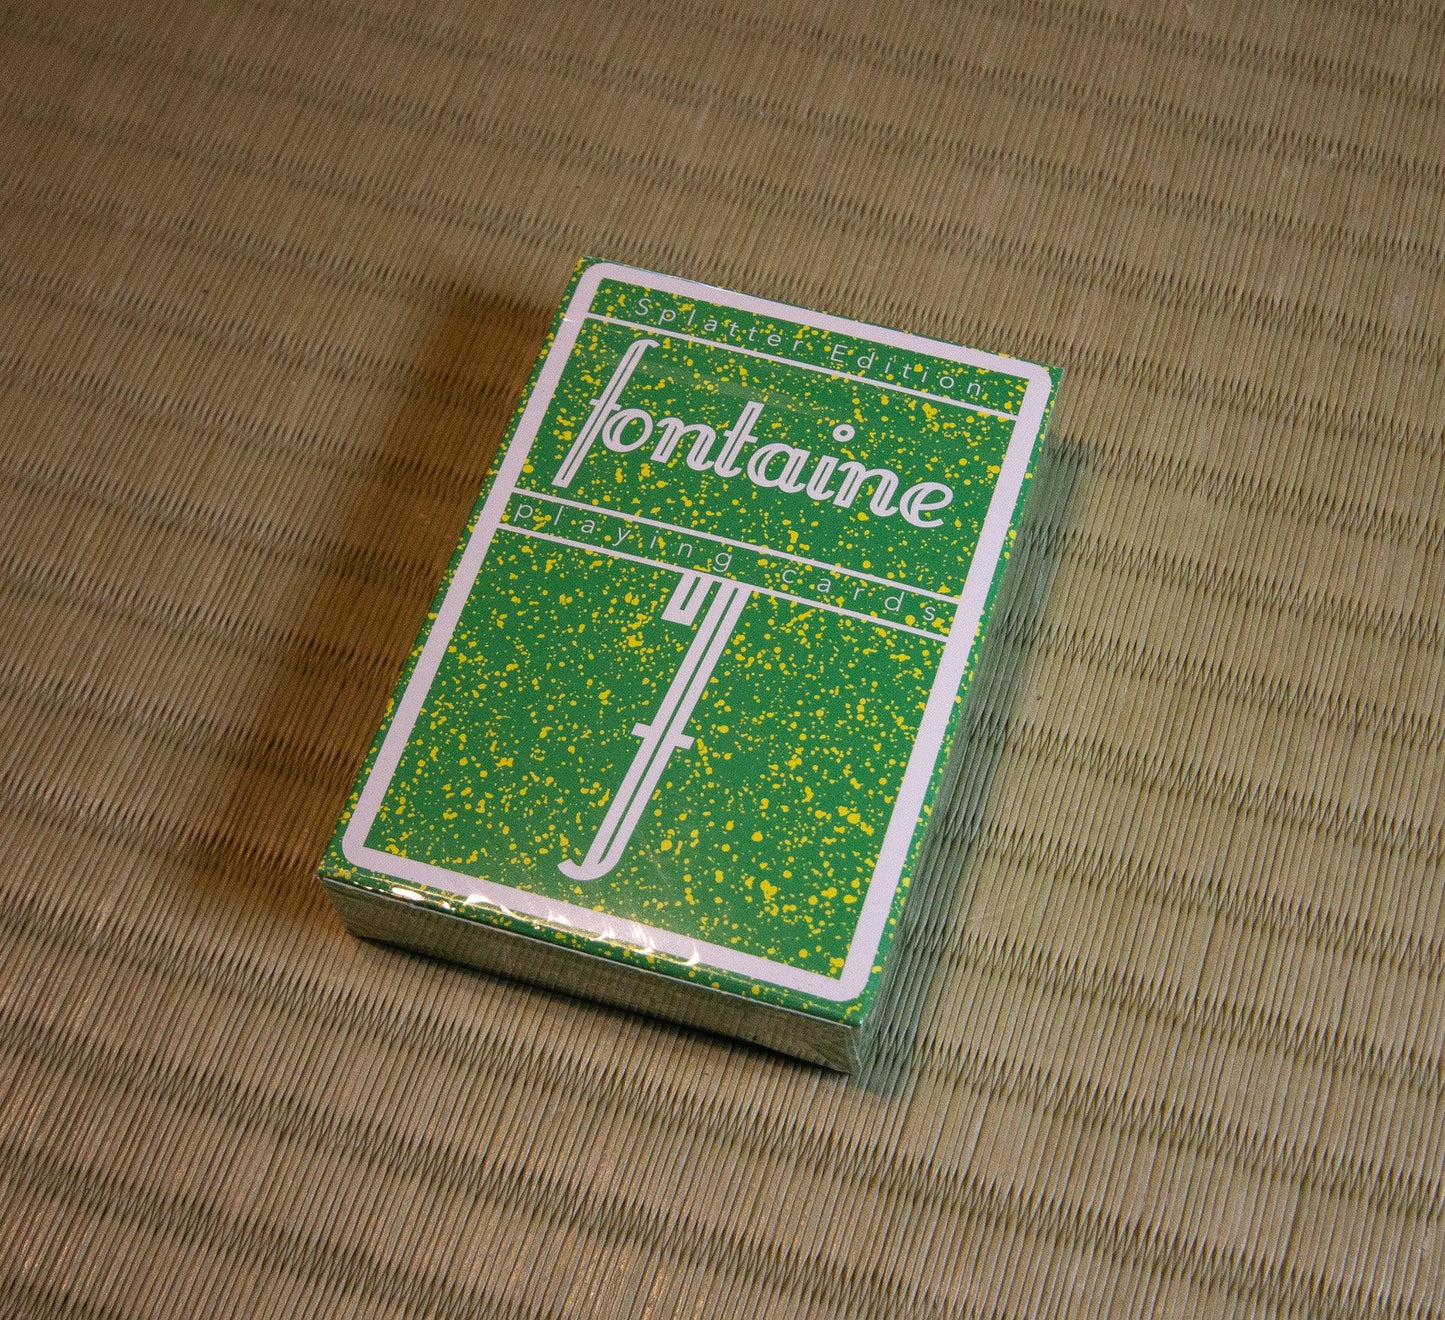 Splatter Fontaine Playing Cards by Fontaine Cards - Deckita Decks